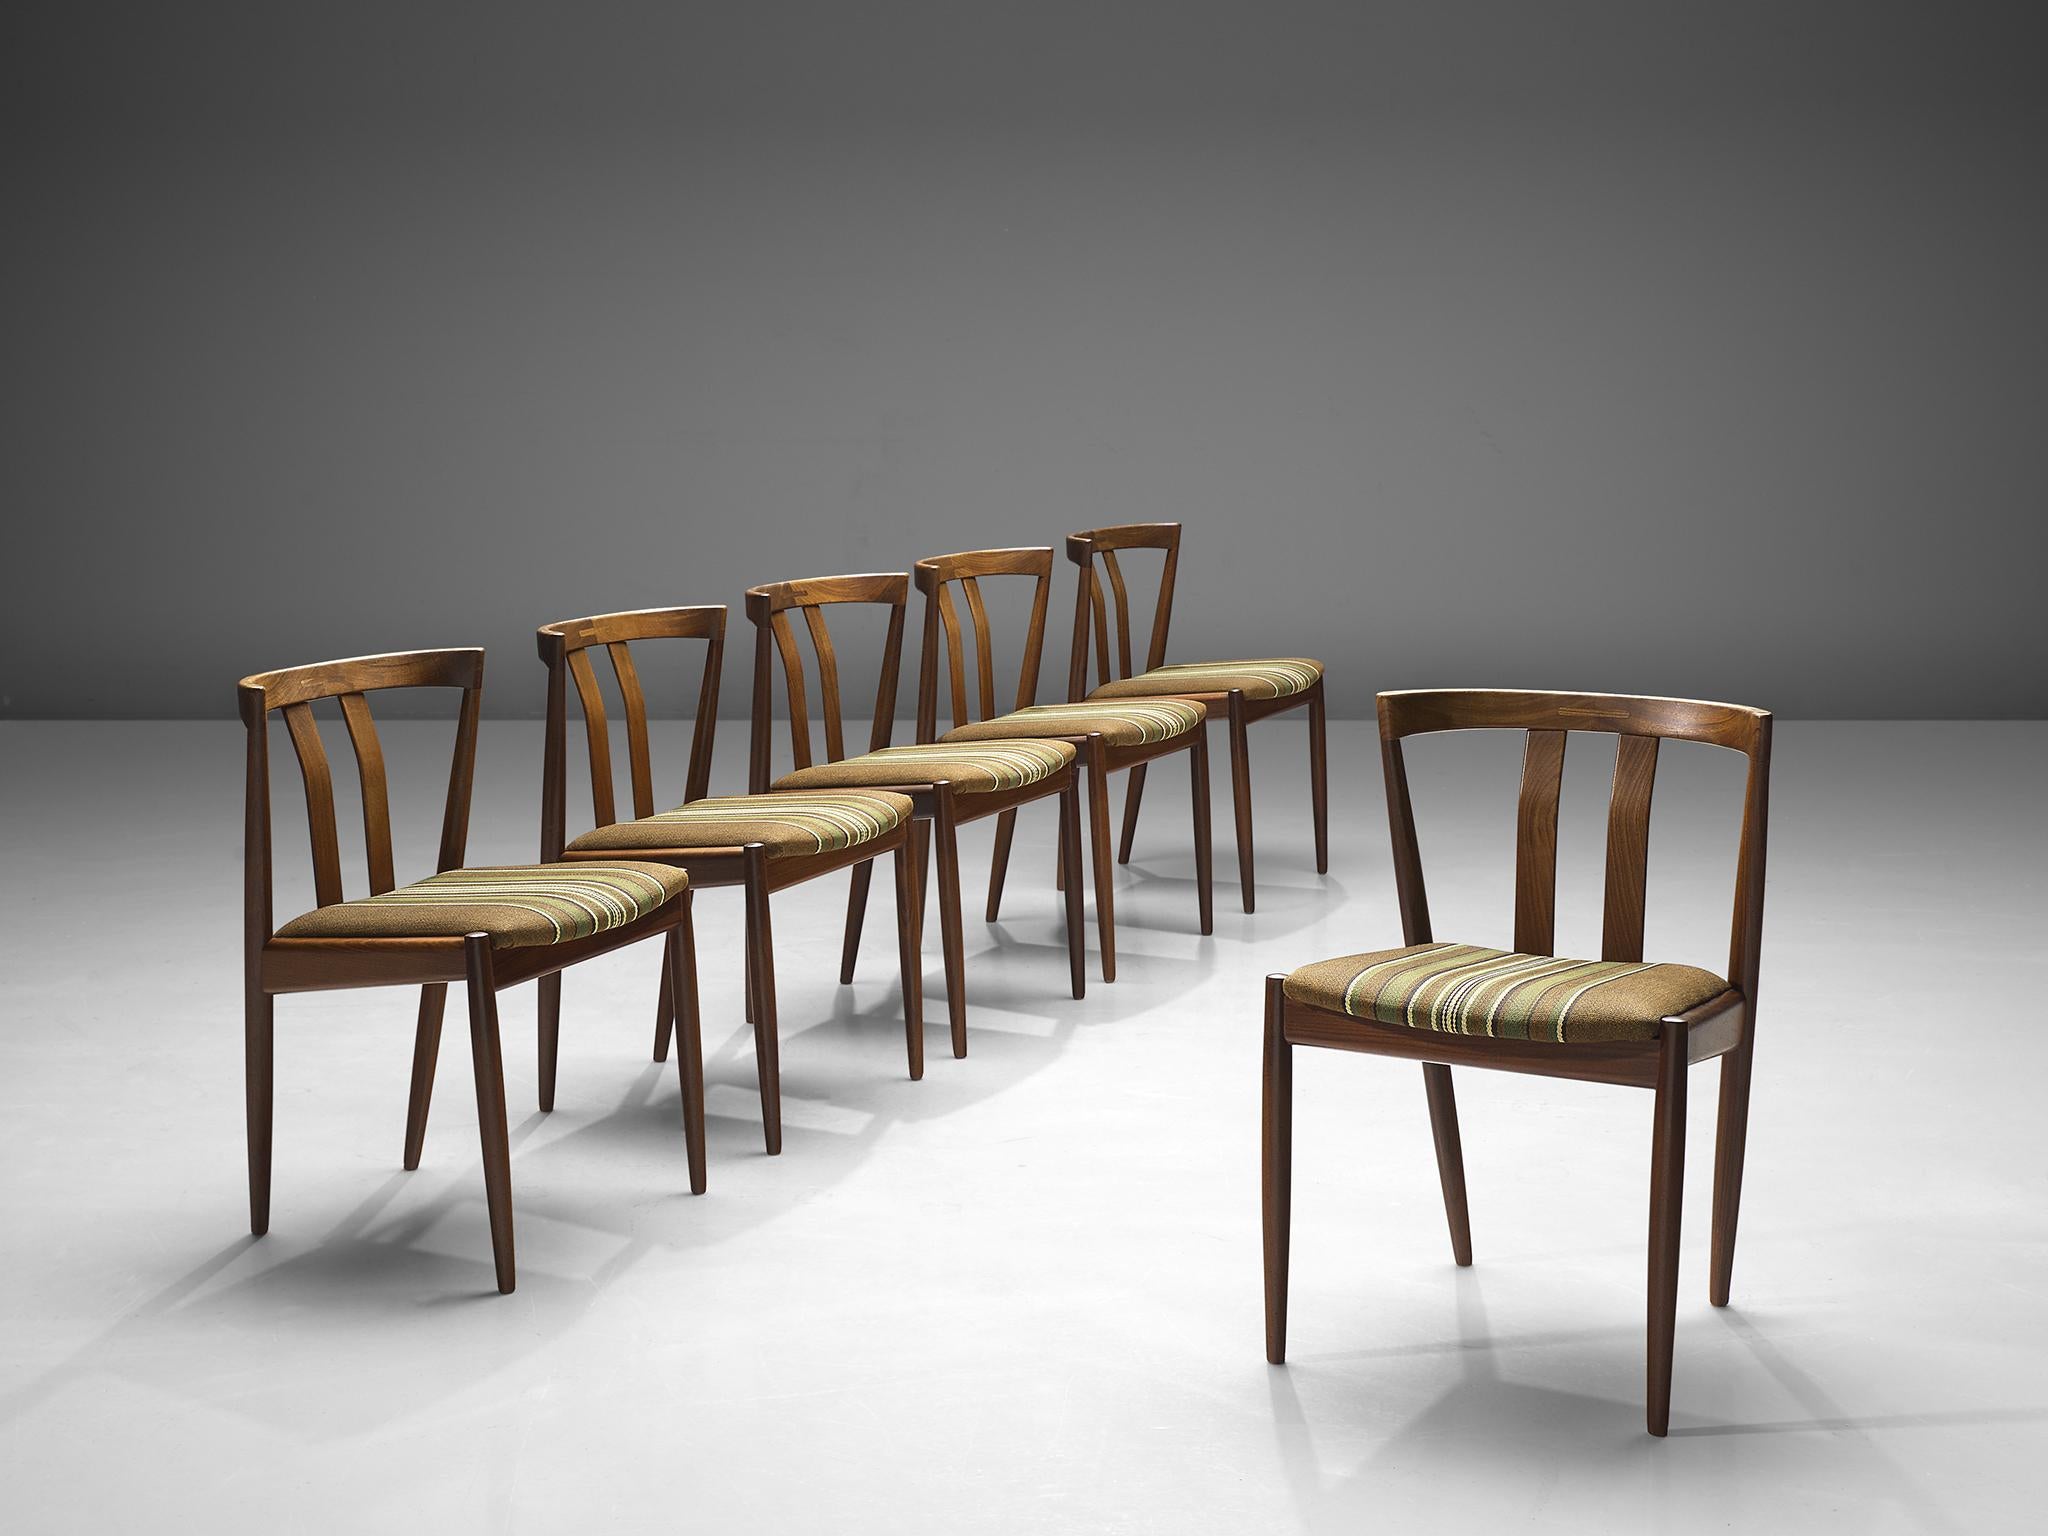 Six chairs, teak and wool, Denmark, 1960s

Elegant set of six Danish dining chairs featuring an open back with two slats, diagonal back legs that run all the way through to the backrest. This set is playful and dynamic yet also bears traits of